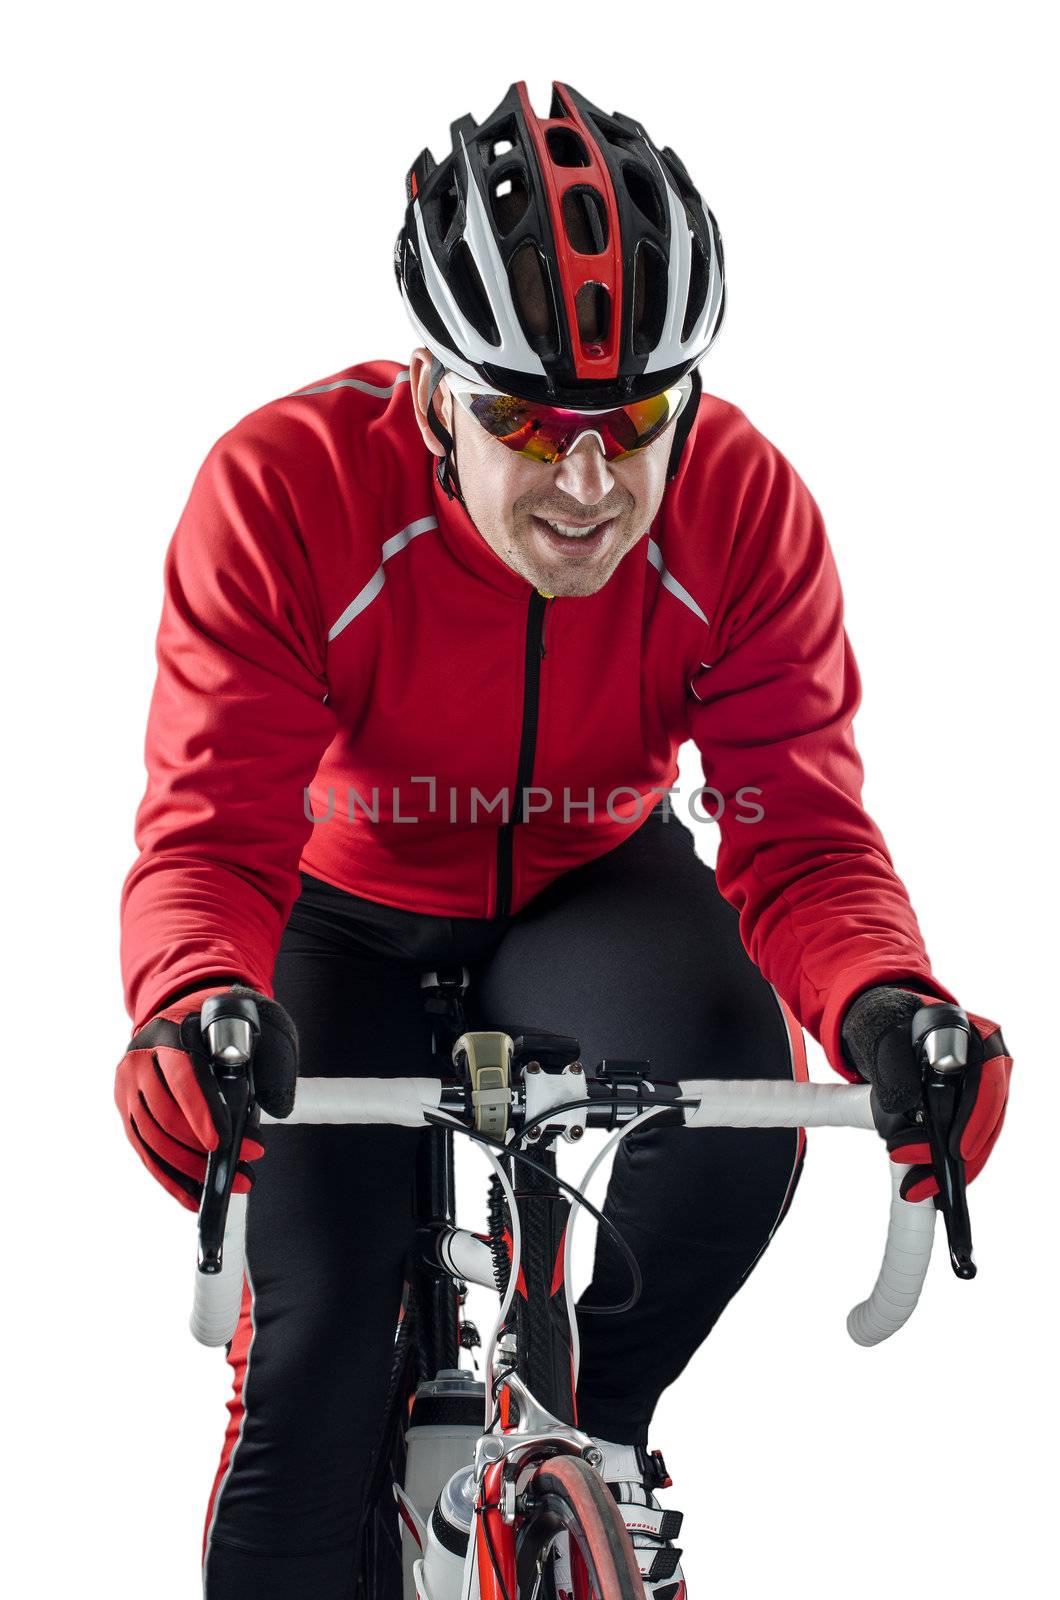 Cyclist riding a bike isolated on white background.